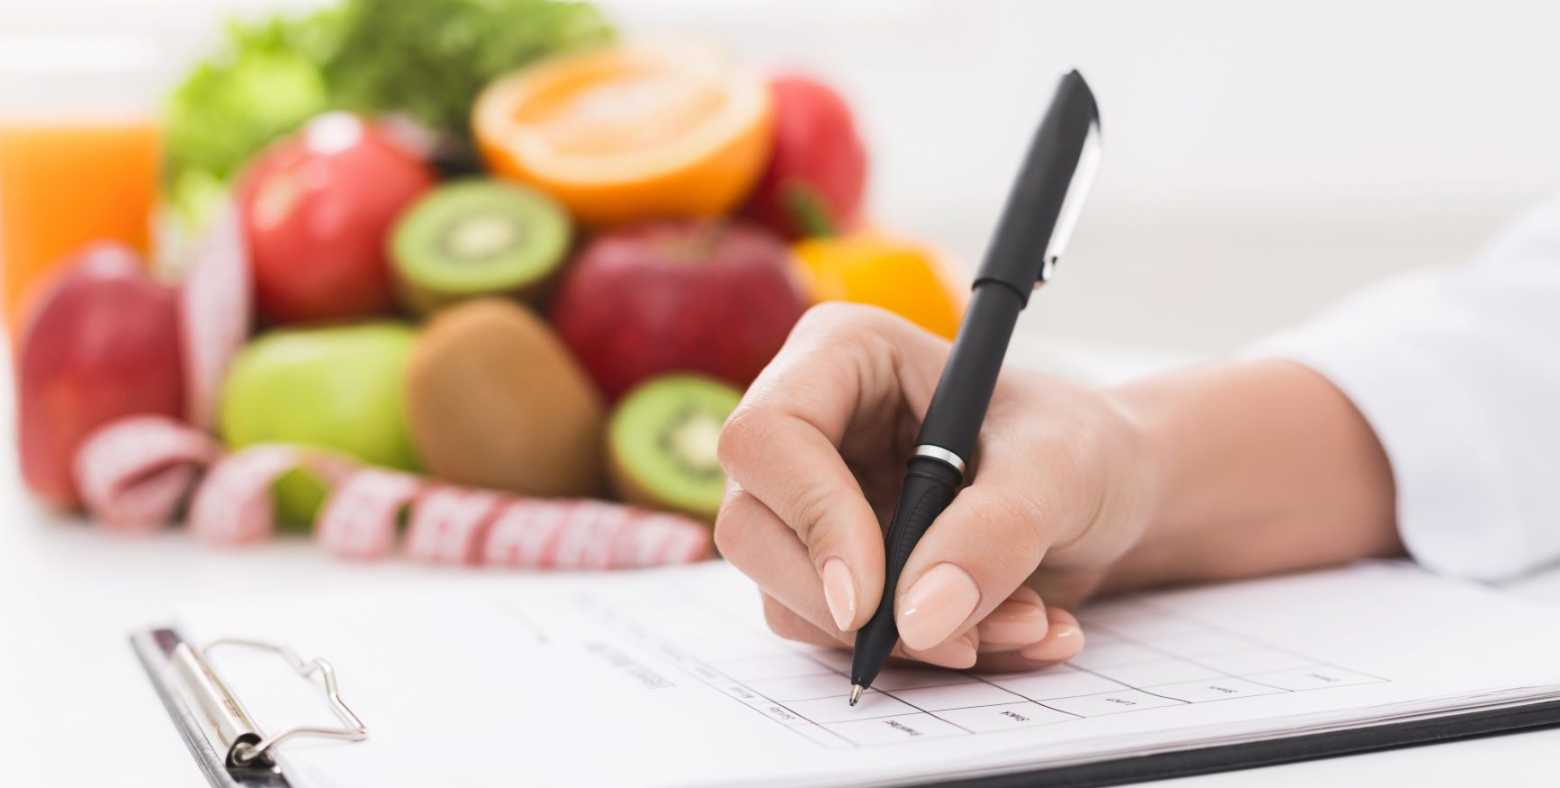 nutrition professional writing notes on clipboard with fruits in background